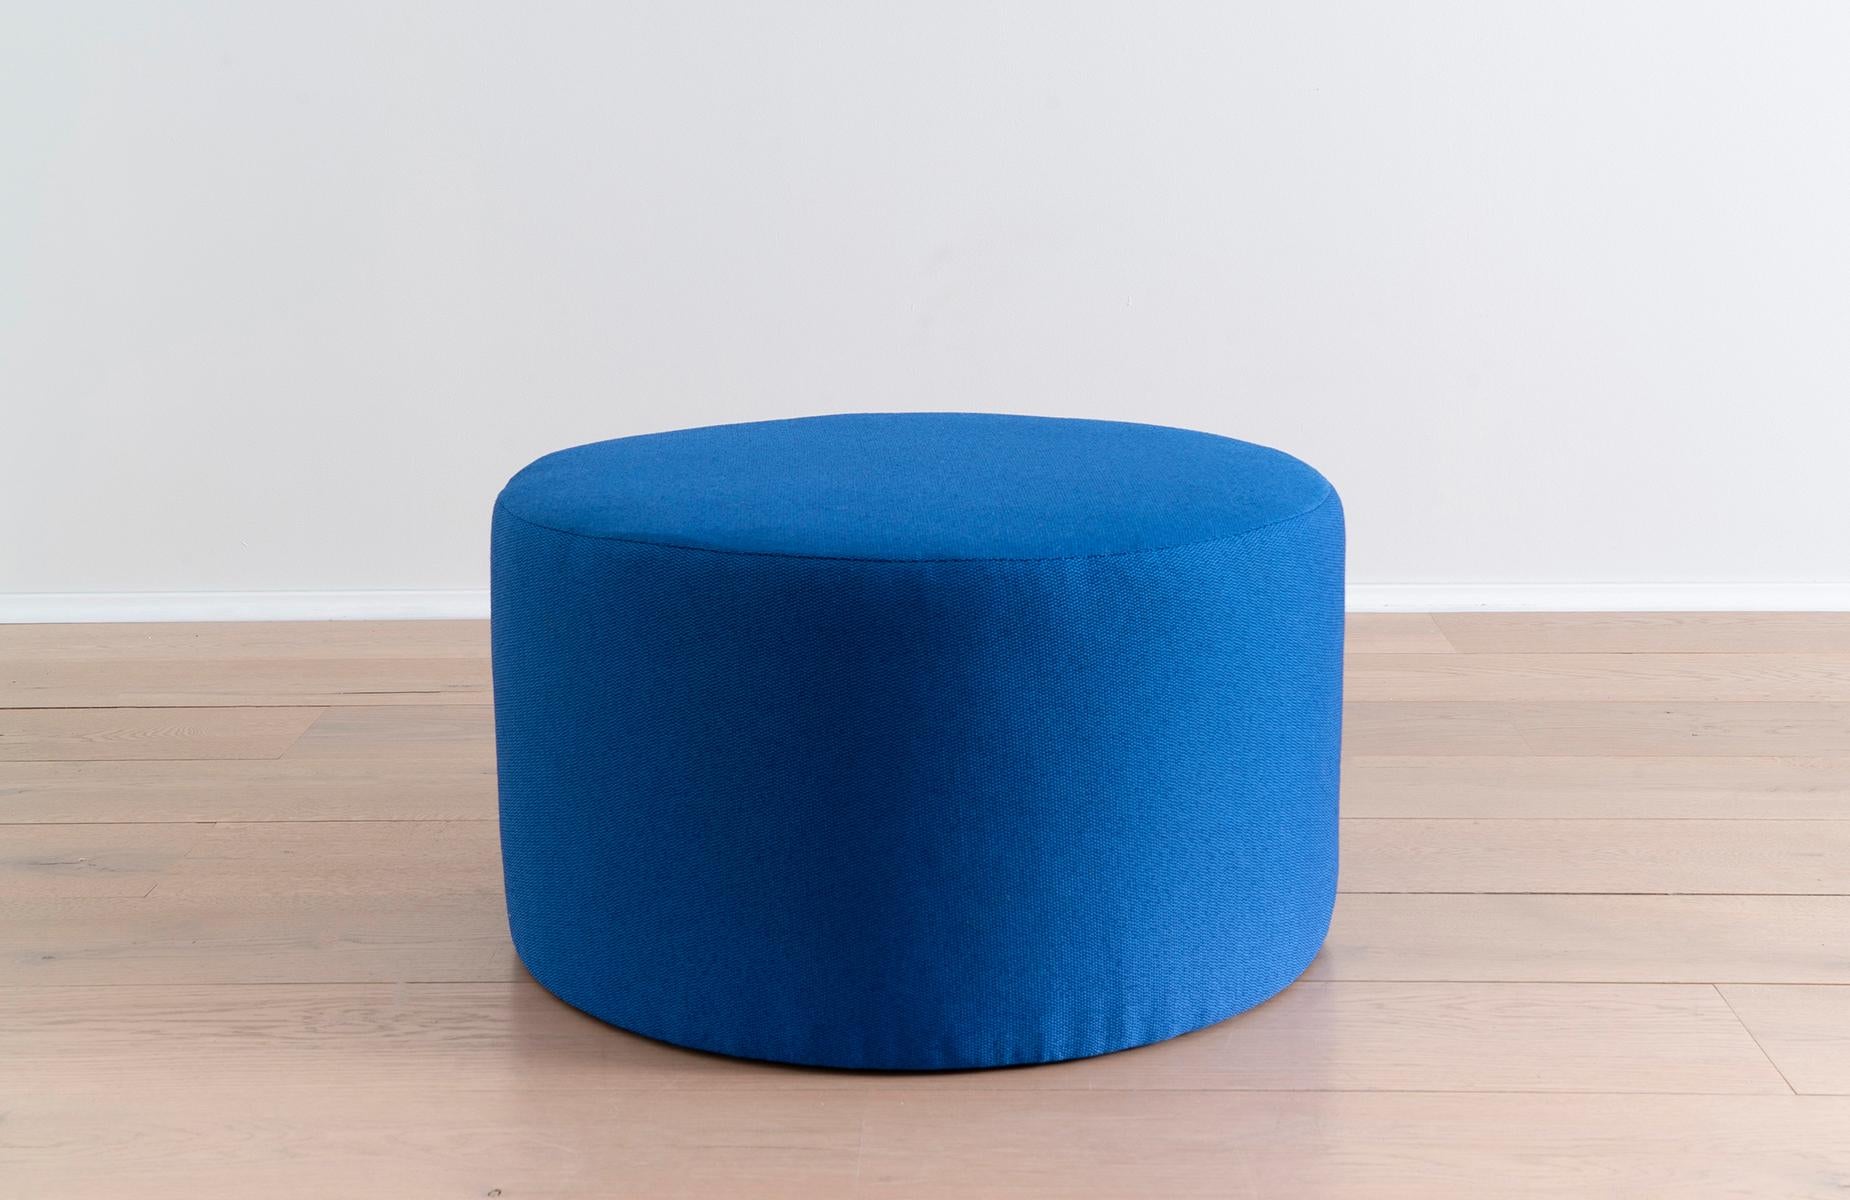 This blue ottoman pairs well with just about any sofa or lounge chair, while also offering versatility as a pouf, coffee or side table. Invite both color and a functional upgrade into any seating arrangement with this sculptural study in